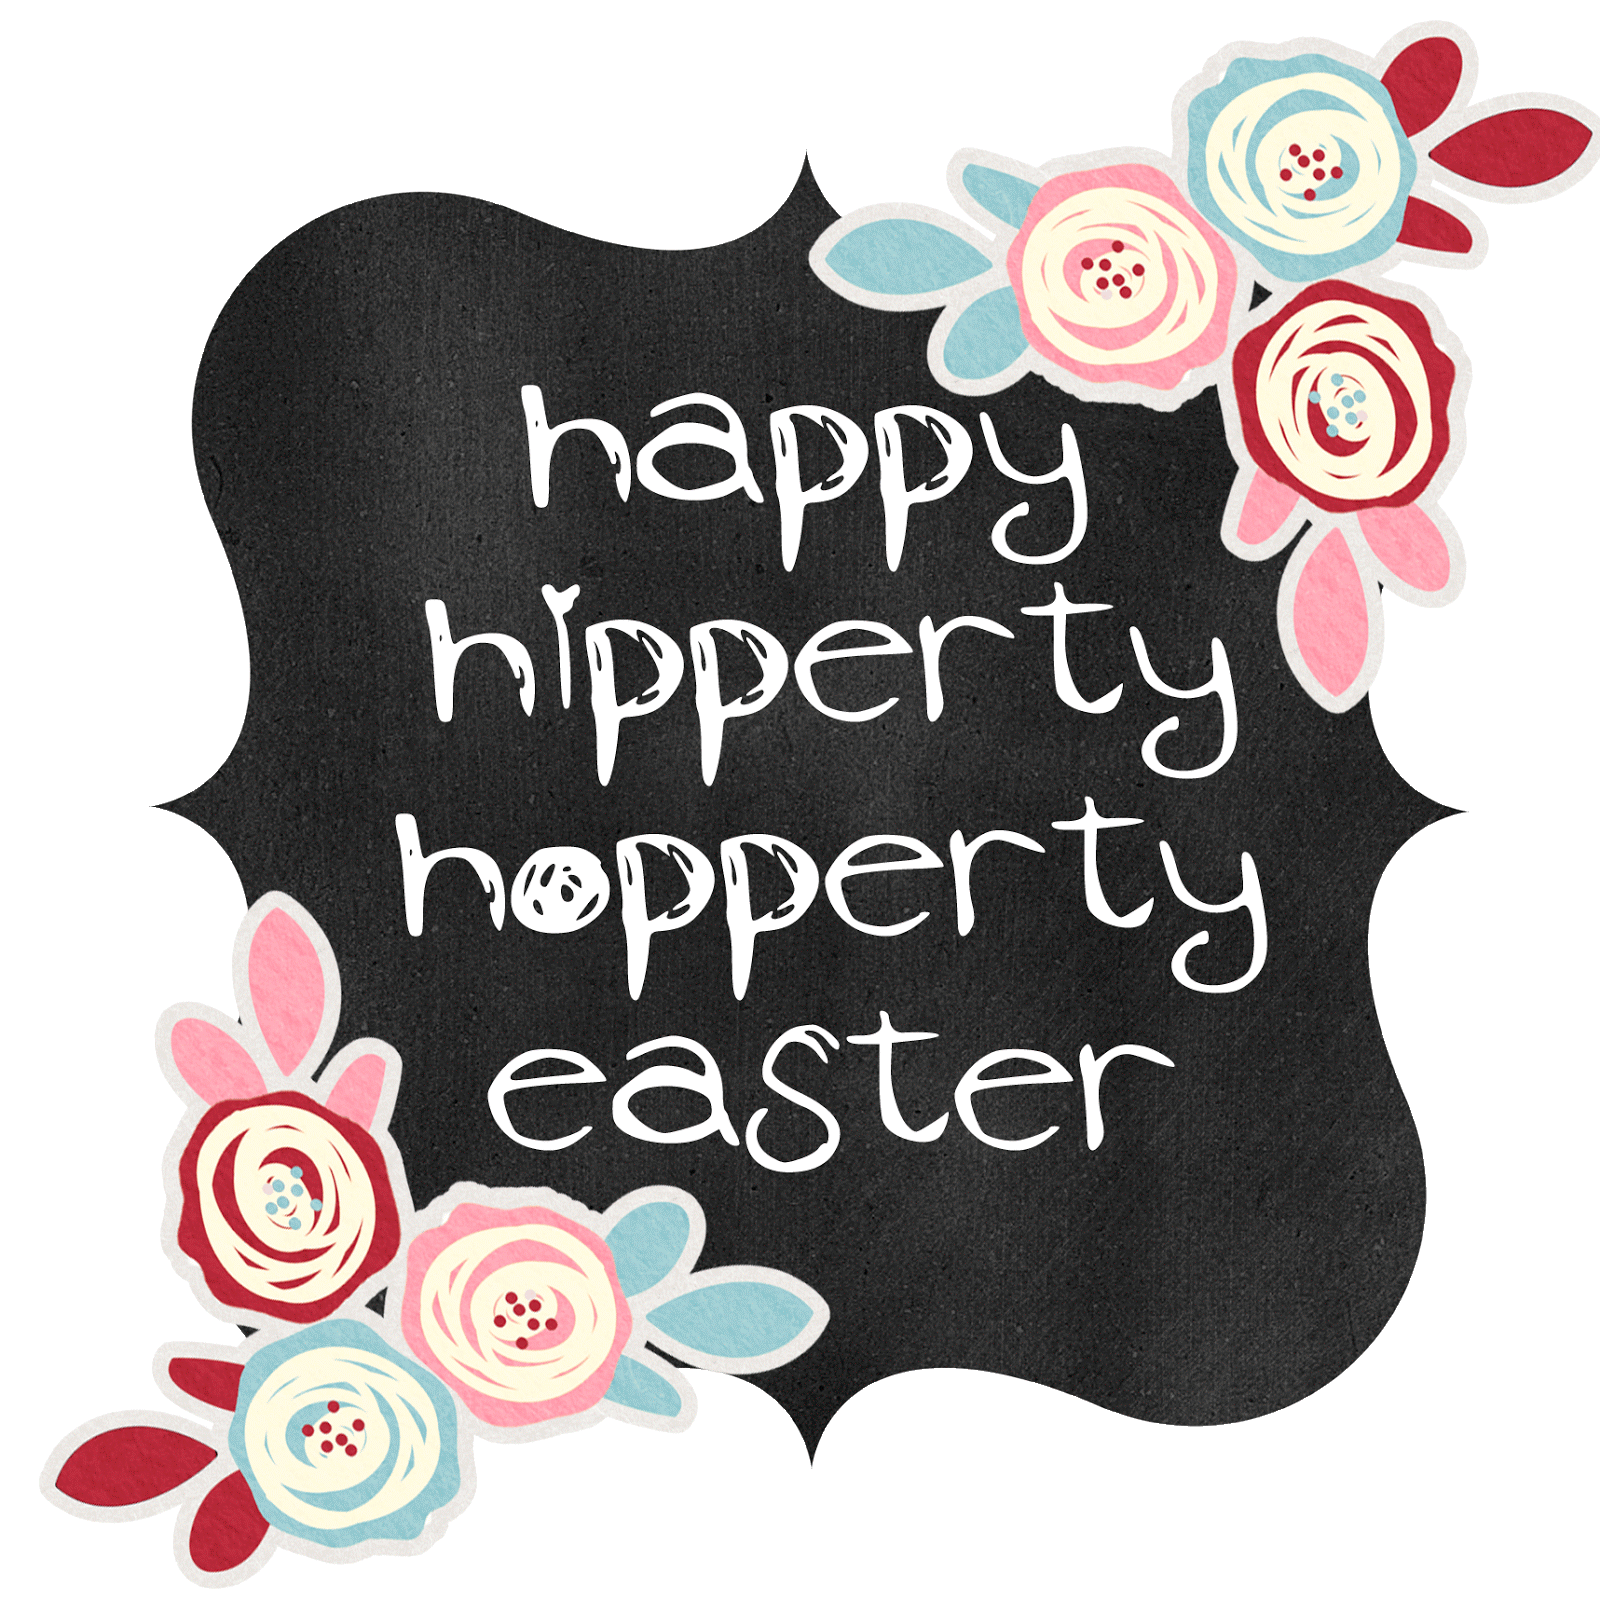 hipperty hopperty Happy Easter